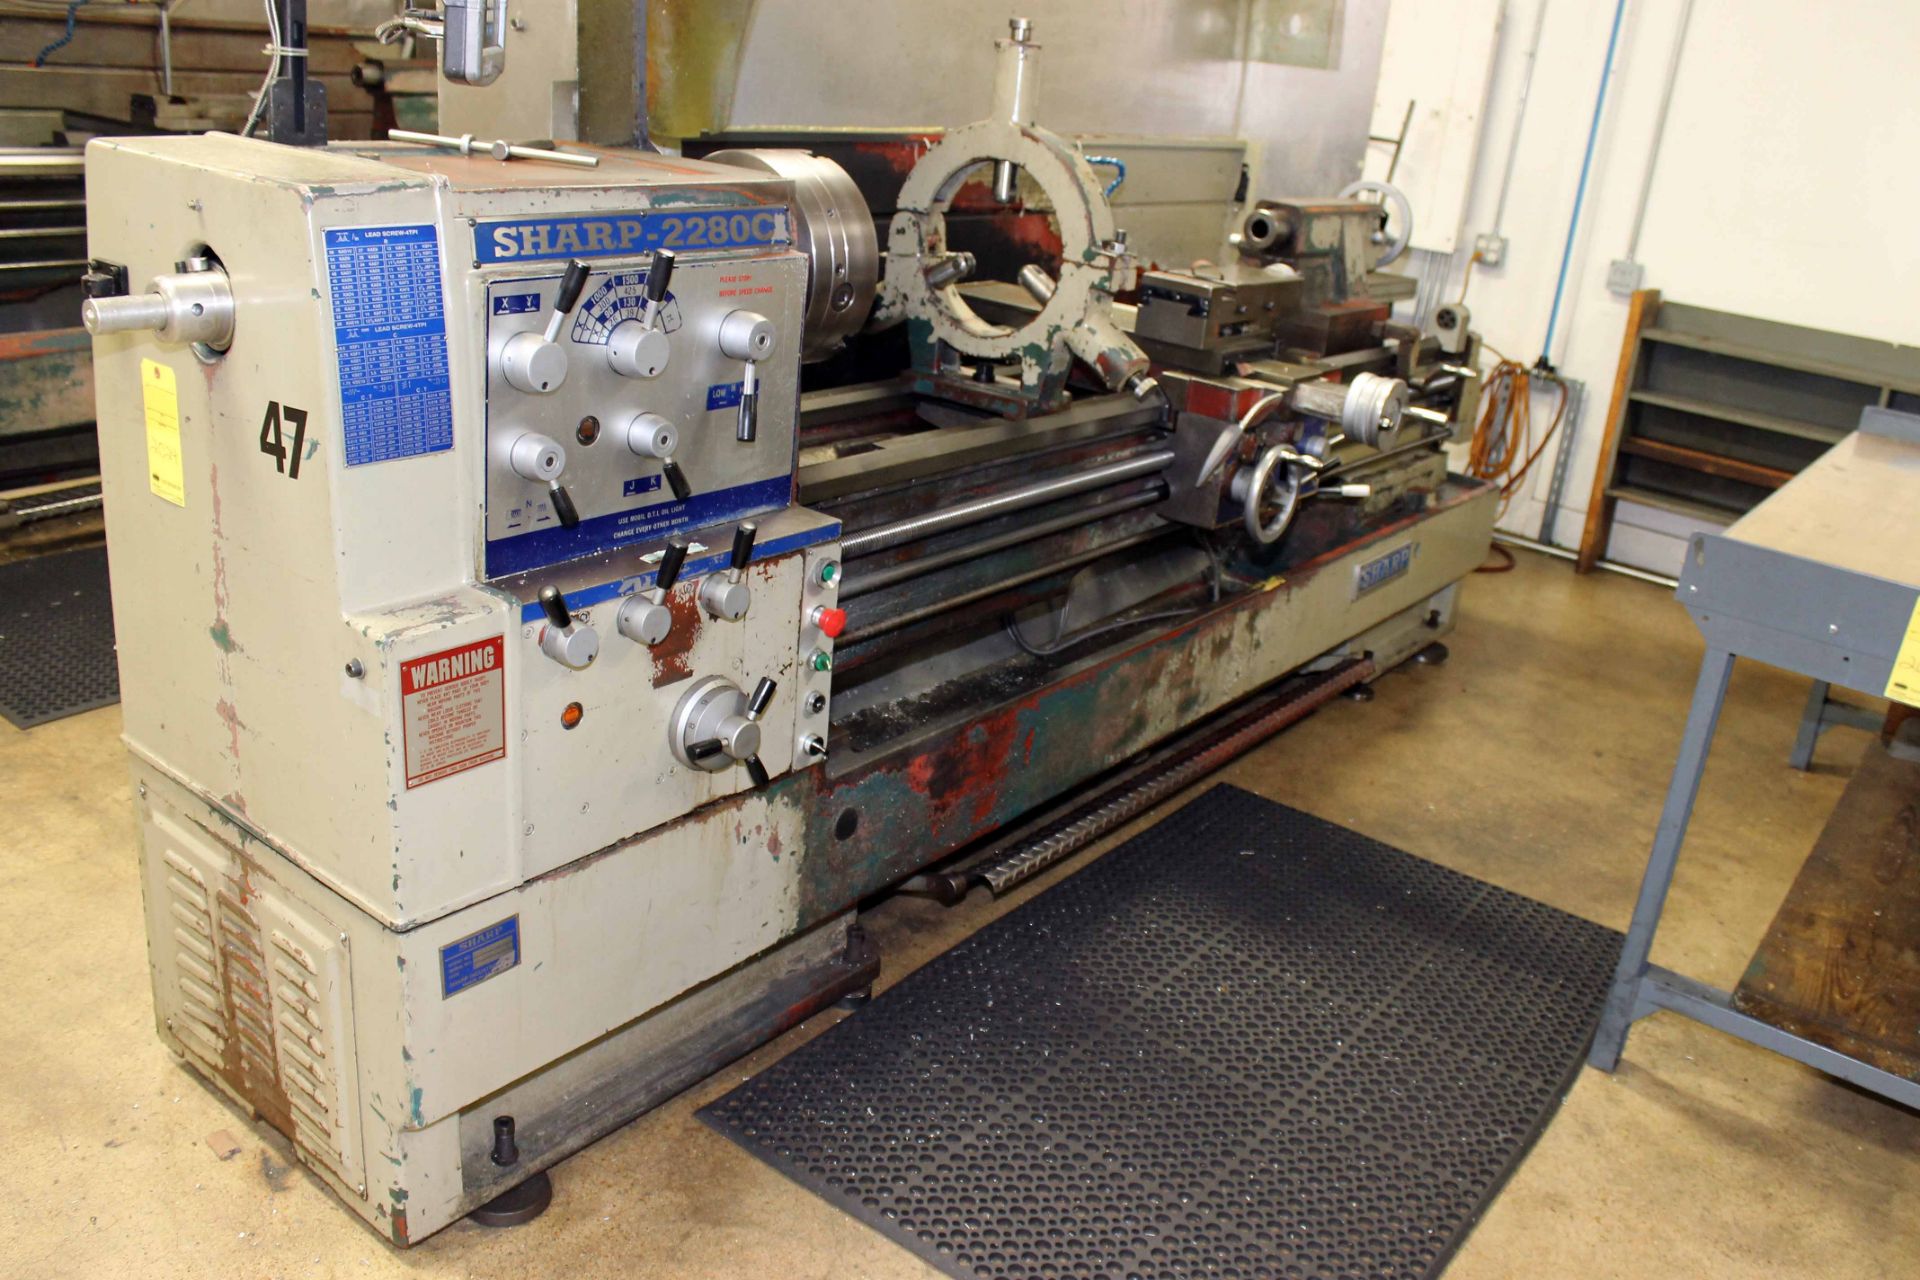 GAP BED ENGINE LATHE, SHARP 22" X 80" MDL. 2280X, spds: 15-1500 RPM, inch/metric thdng., taper